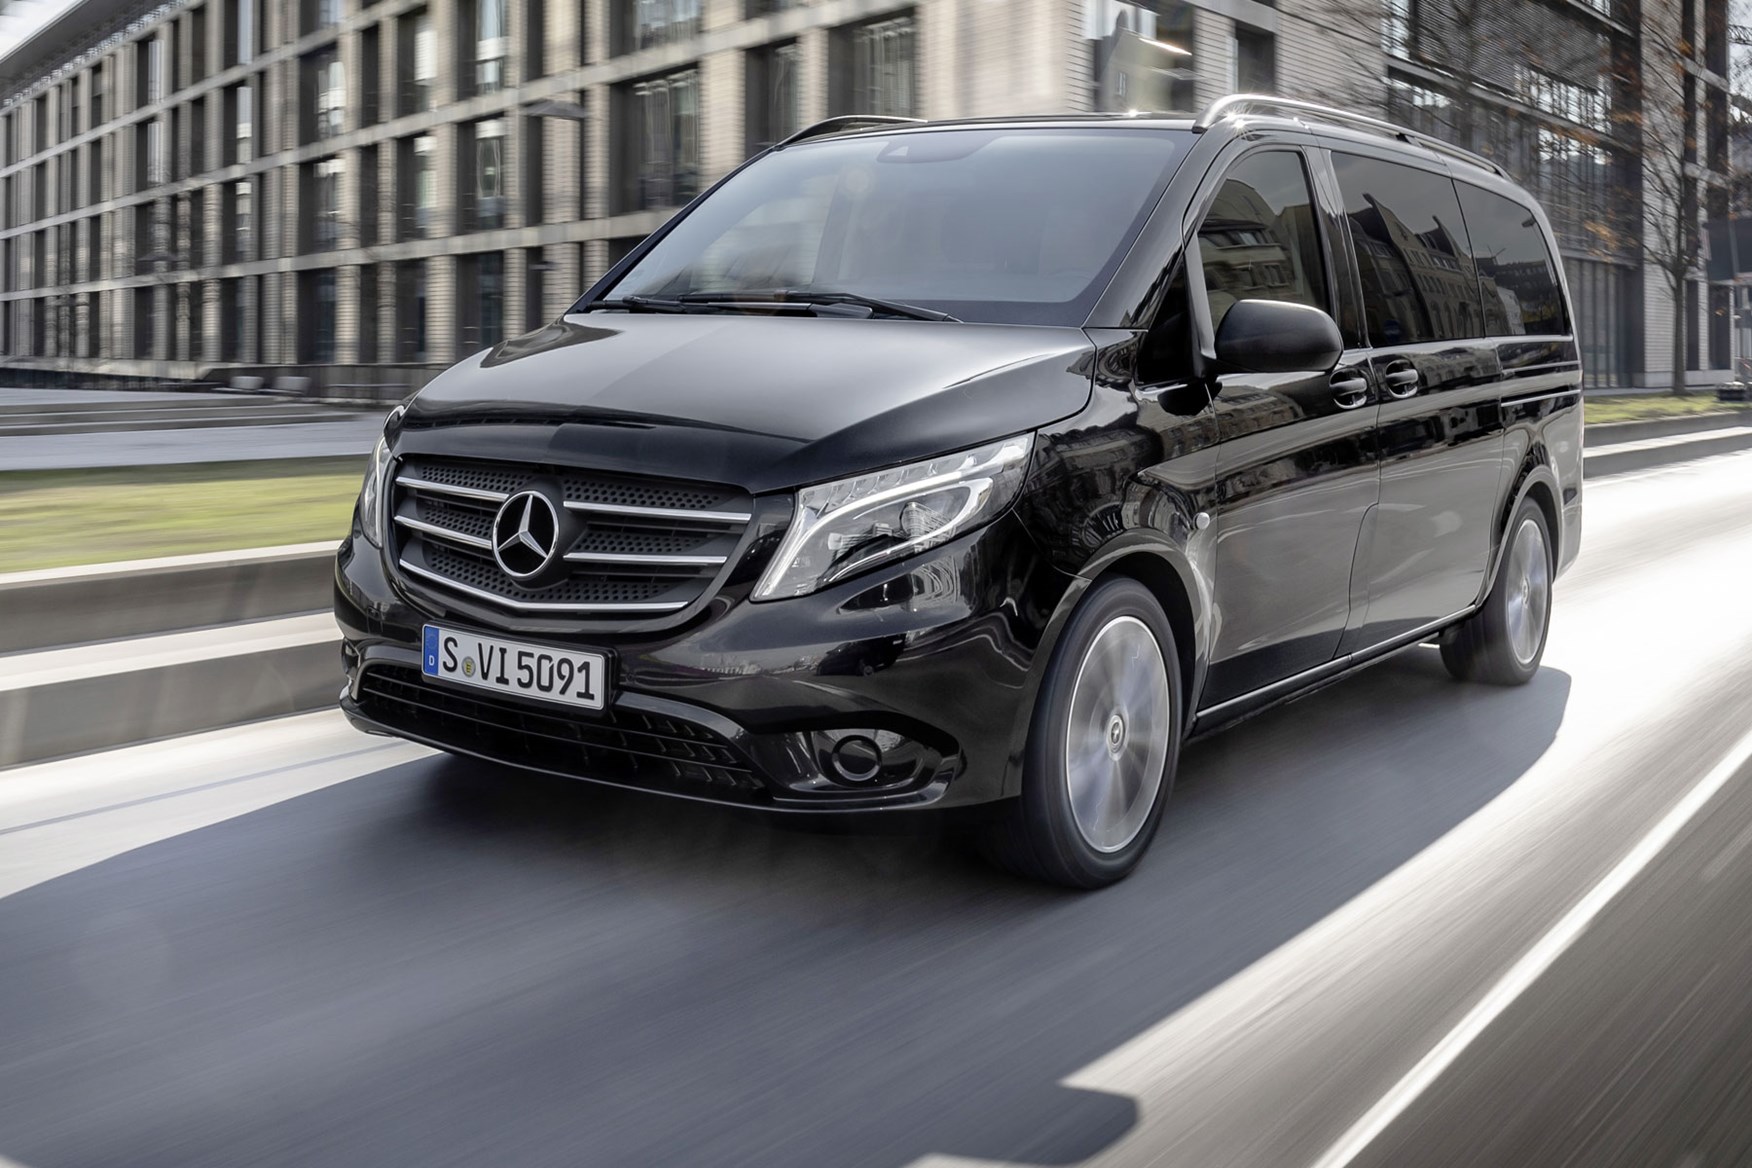 Mercedes-Benz Vito 2019 – new engines and tech revealed | Parkers